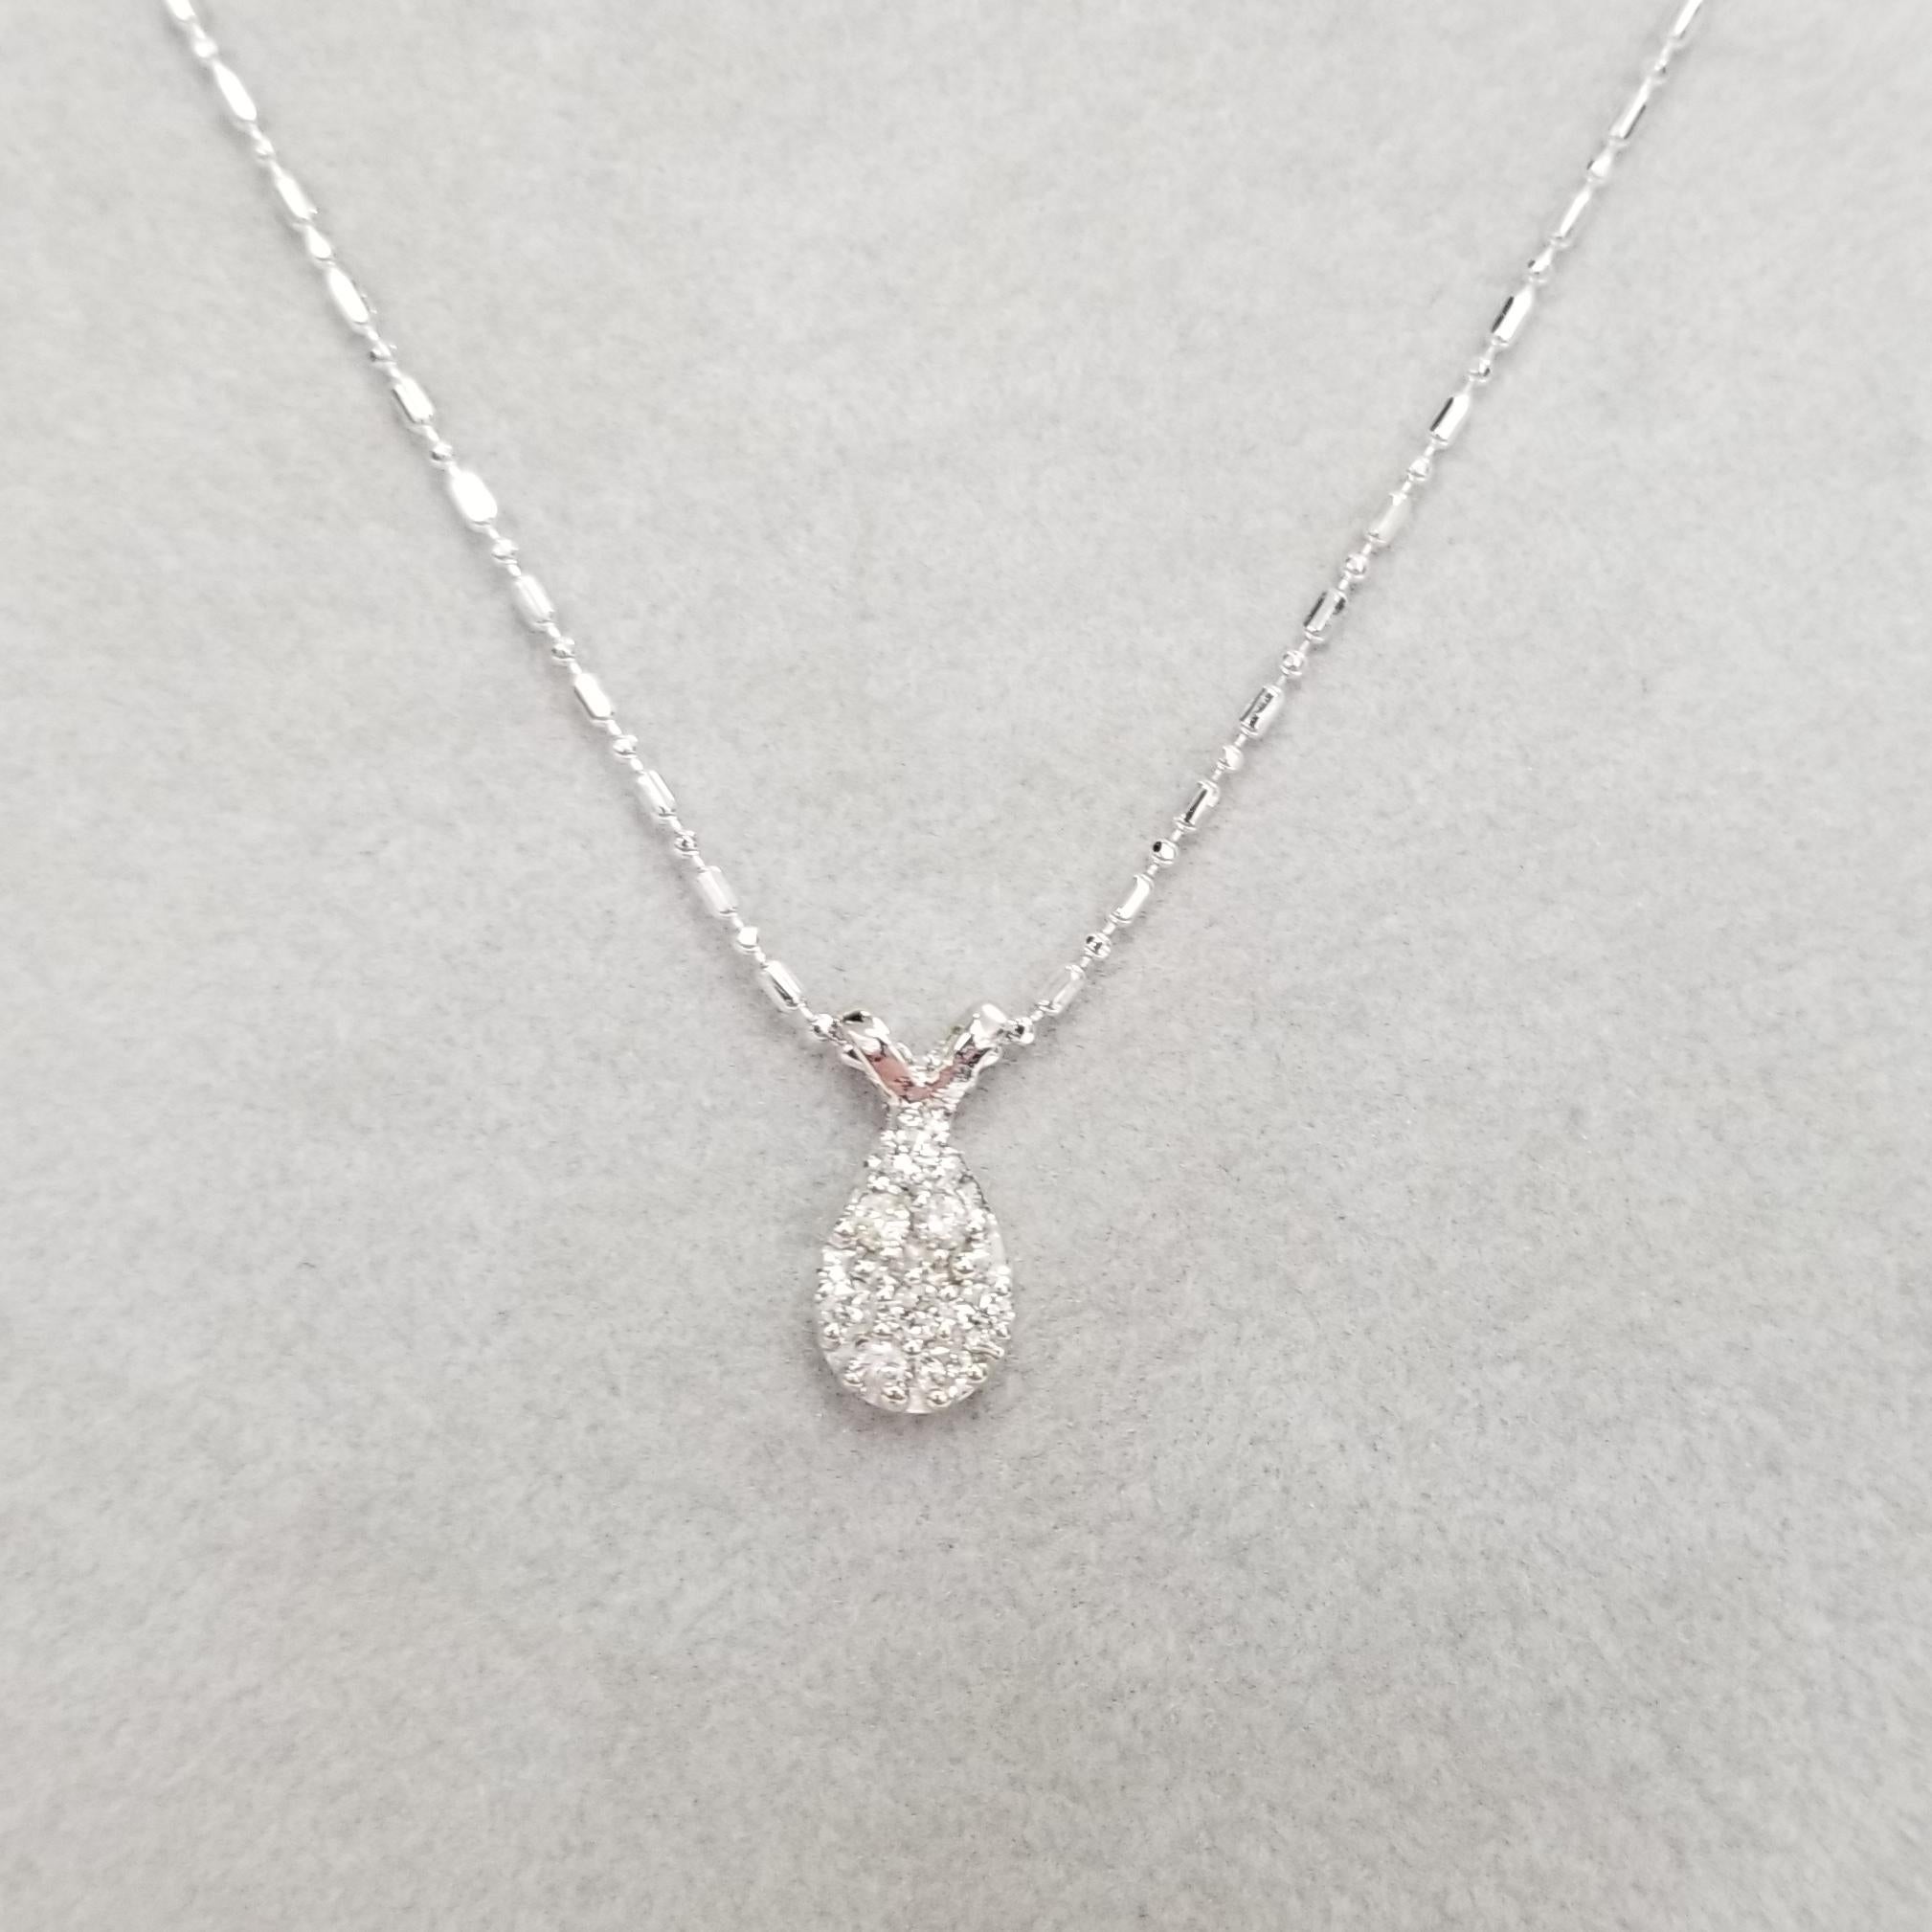 Specifications:
    main stone: ROUND CUT DIAMONDS
    DIAMONDS: 8 PCS
    carat total weight: APPROXIMATELY .20 CTW
    color: G
    clarity: VS
    metal: 14K WHITE GOLD
    type:  PENDANT
    LENGTH: 16INCHES
